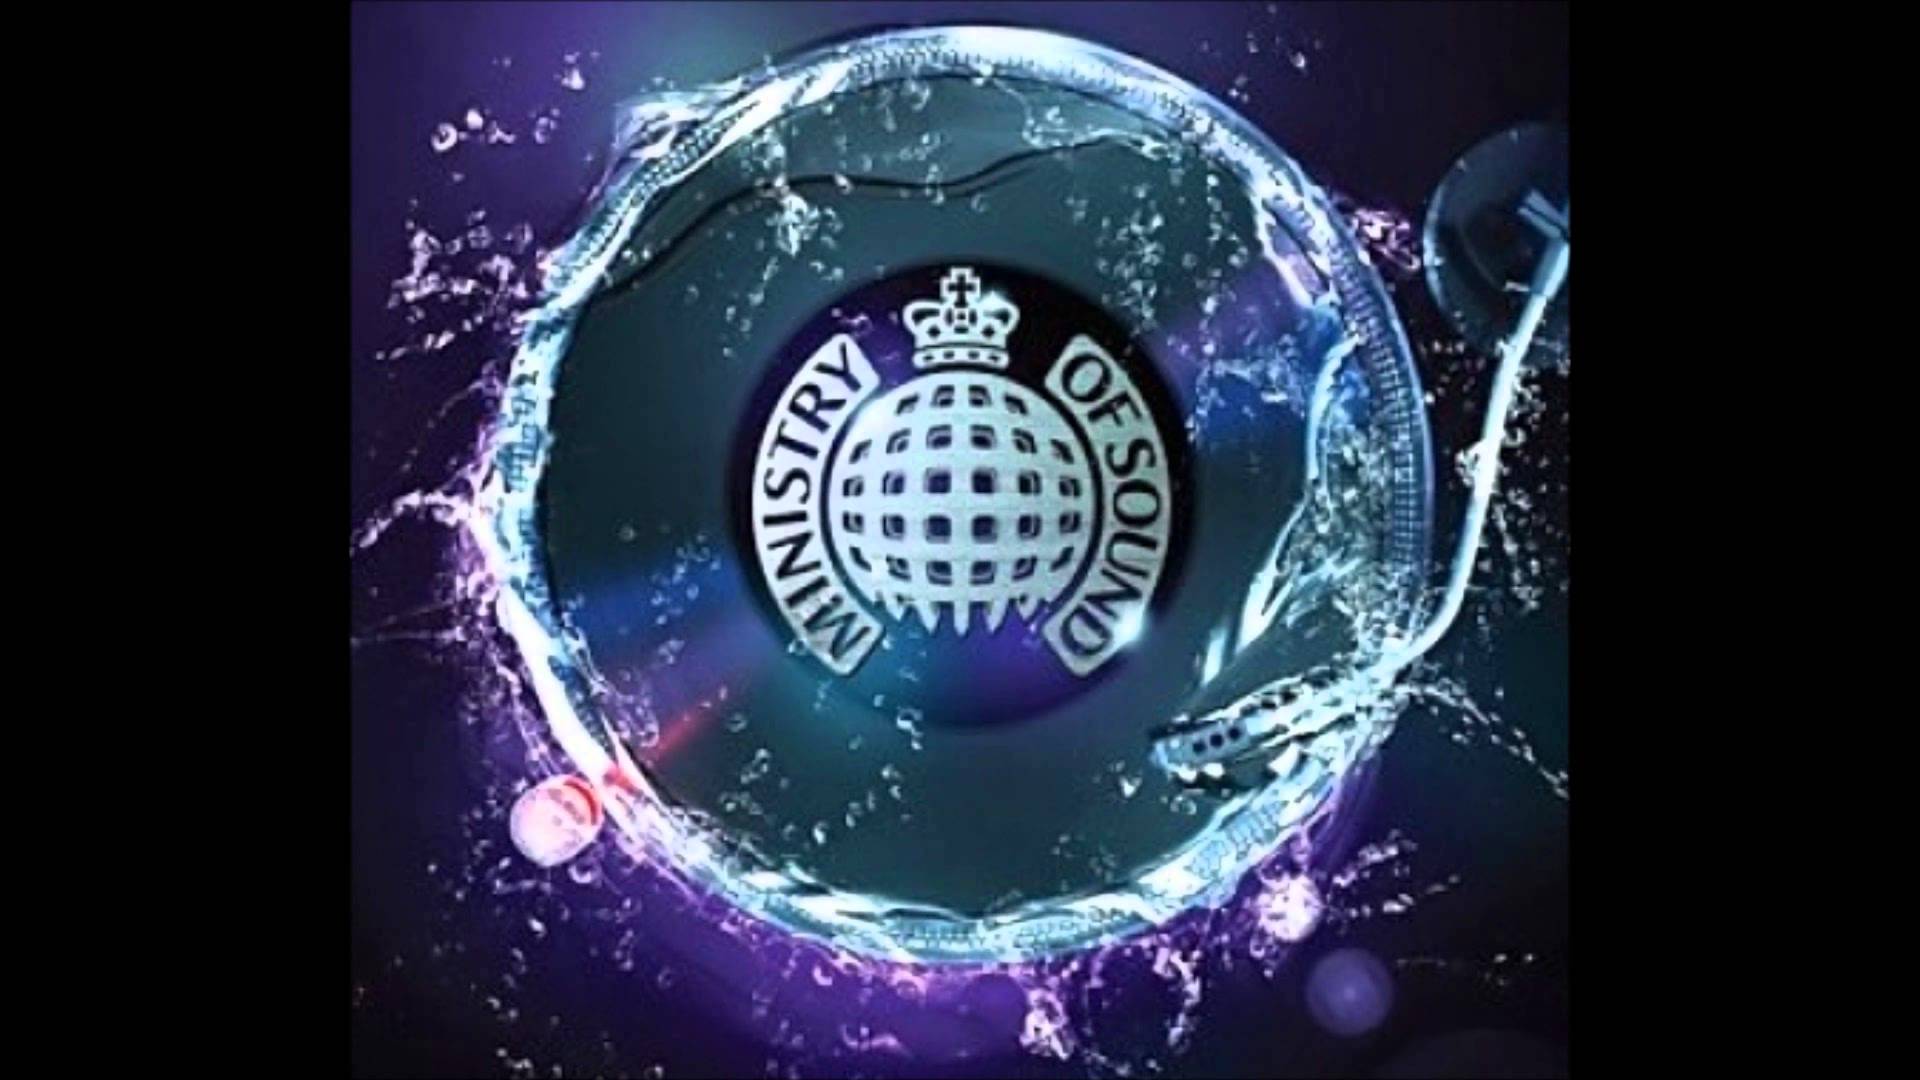 Ministry of sound Latino mix cd3 - YouTube